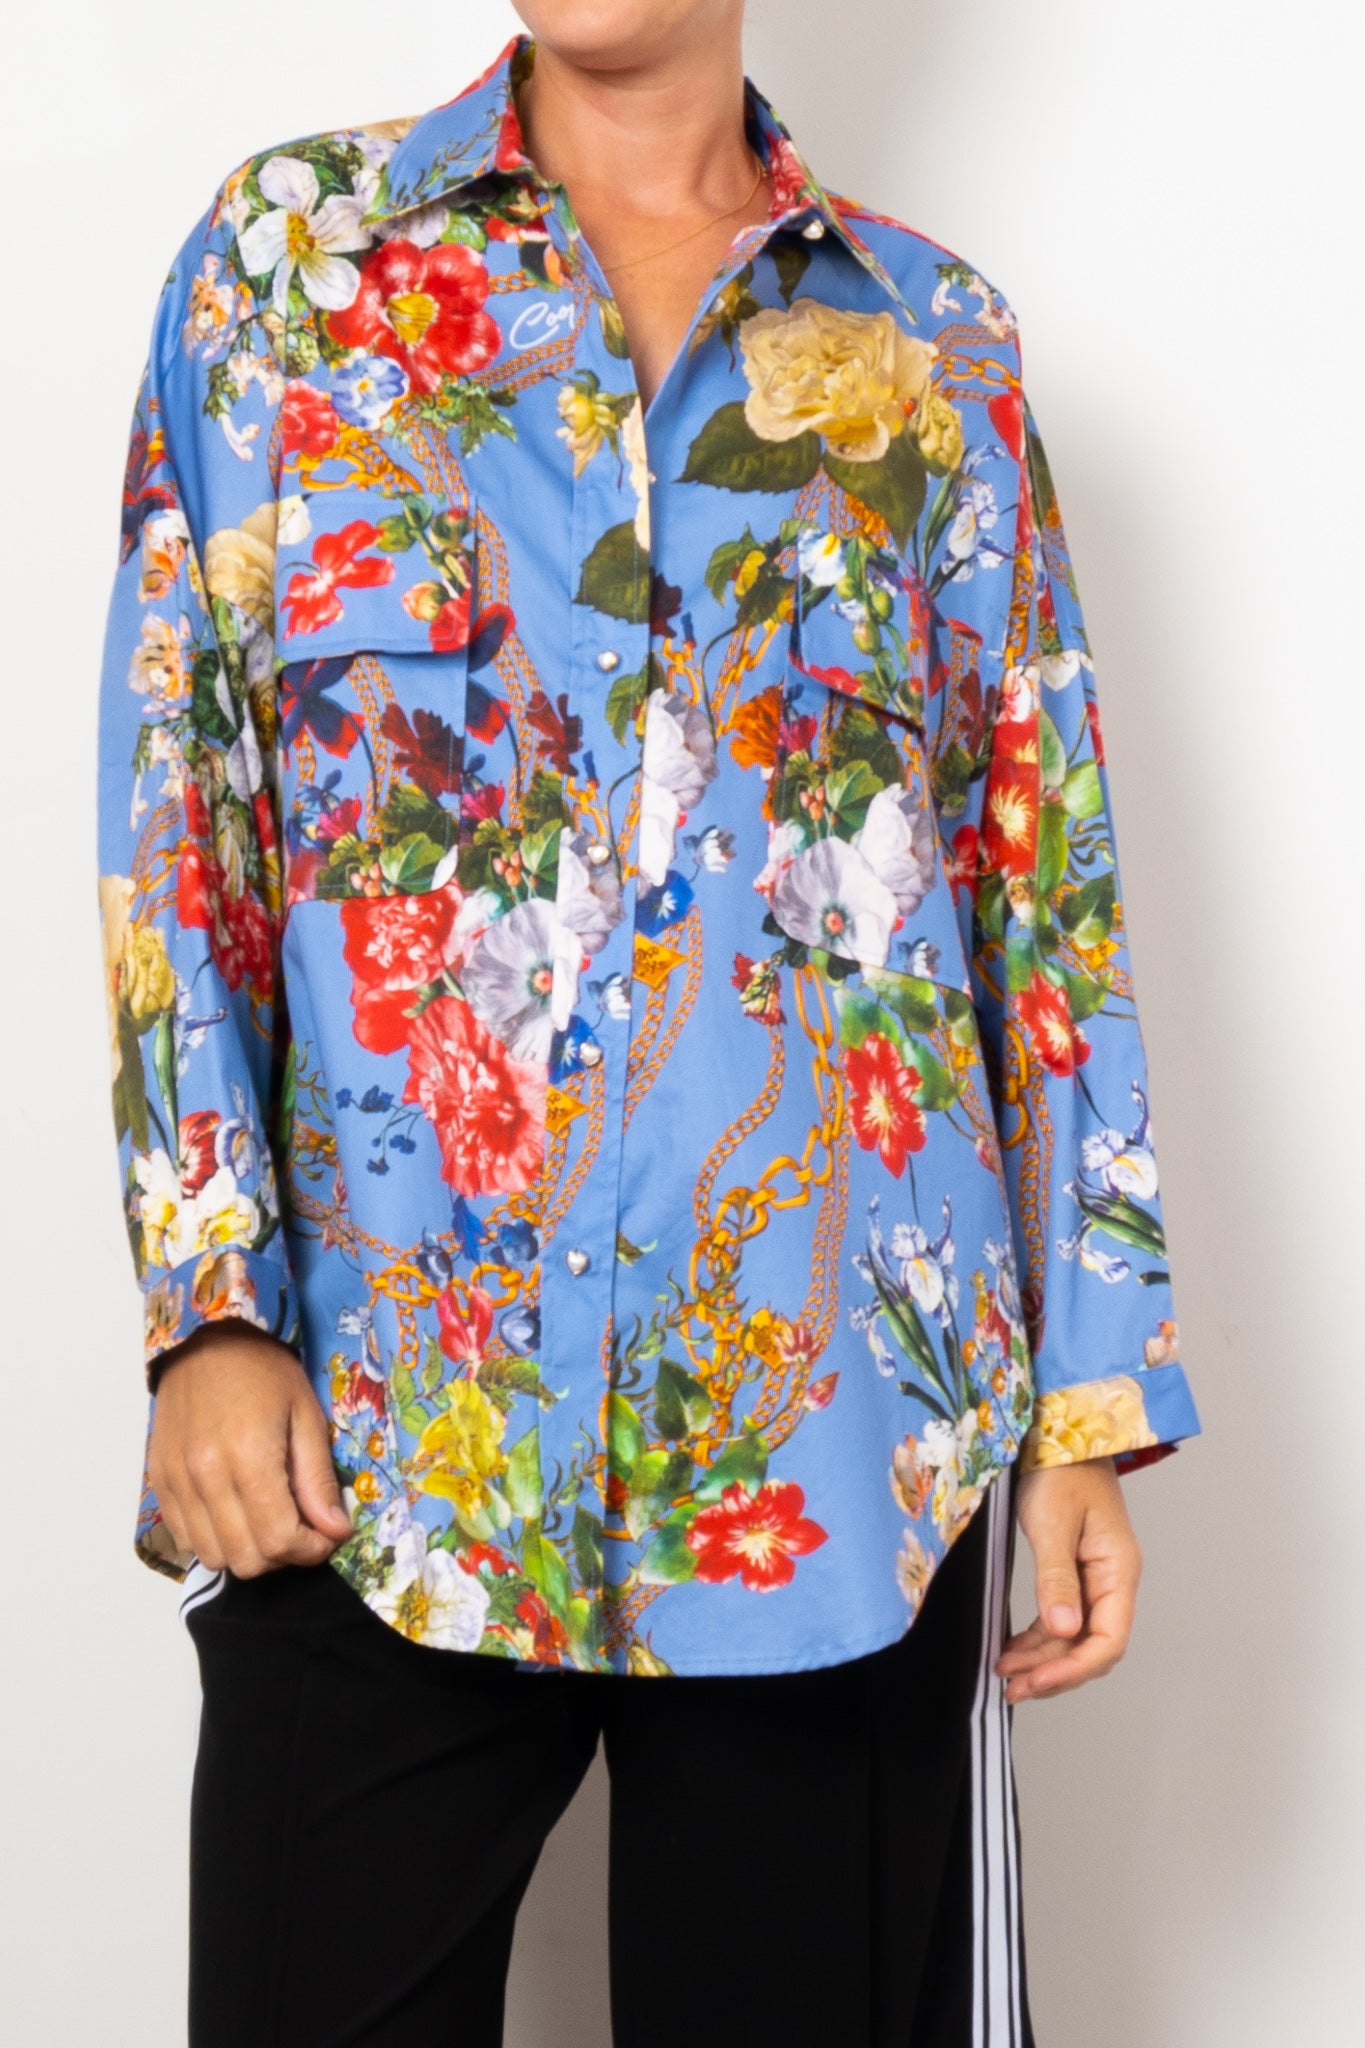 COOP by Trelise Cooper Come On Over Print Shirt